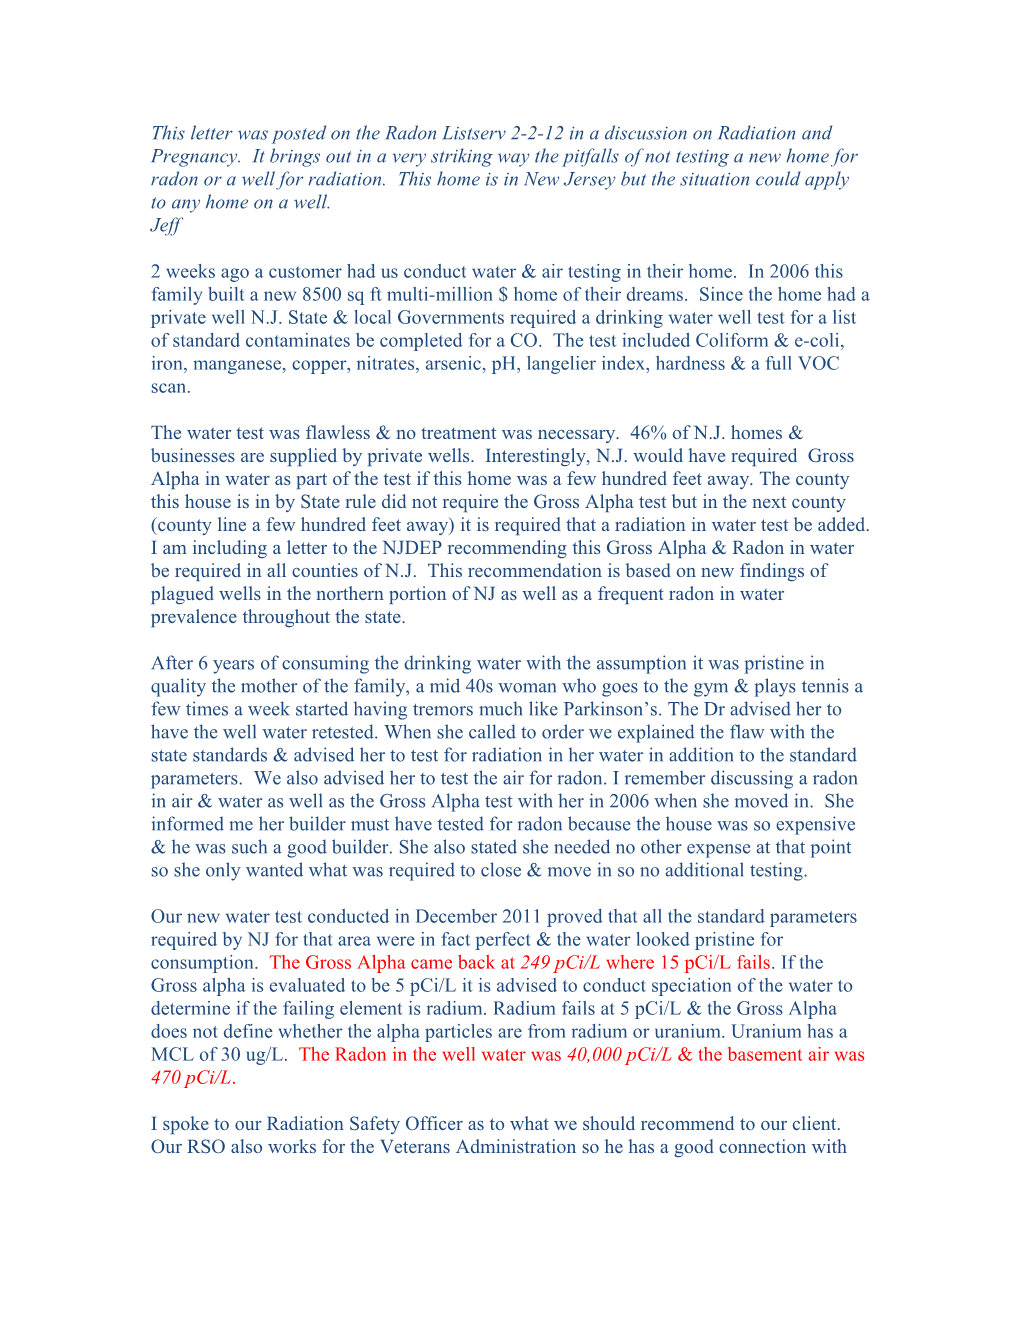 This Letter Was Posted on the Radon Listserv 2-2-12 in a Discussion on Radiation and Pregnancy